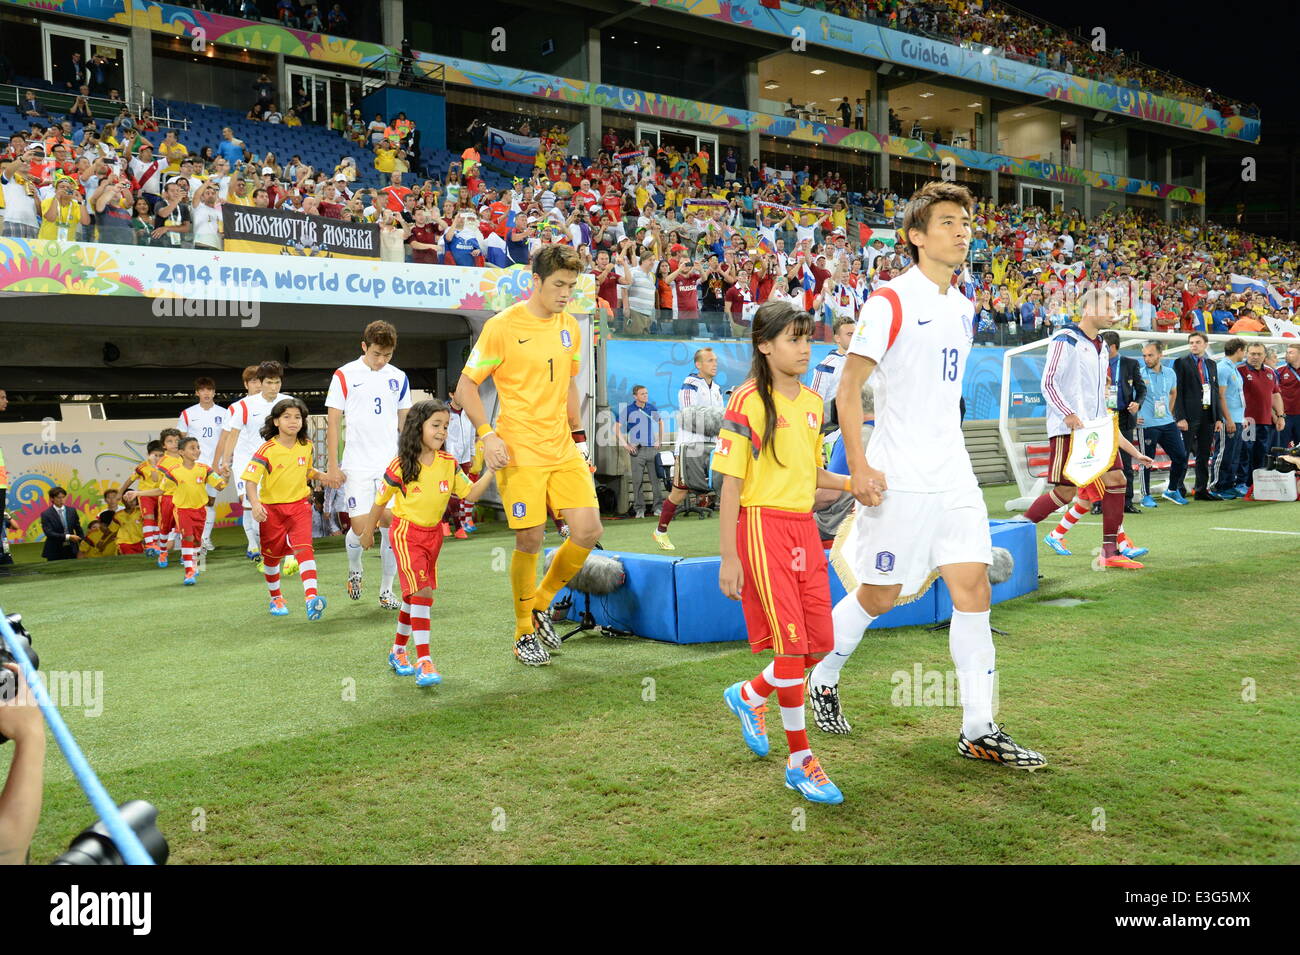 Cuiaba, Brazil. 17th June, 2014. South Korea team group (KOR) Football/Soccer : (R-L) Koo Ja-Cheol, Jung Sung-Ryong and Yun Suk-Young of South Korea enter the pitch before the FIFA World Cup Brazil 2014 Group H match between Russia 1-1 South Korea at Arena Pantanal in Cuiaba, Brazil . © SONG Seak-In/AFLO/Alamy Live News Stock Photo